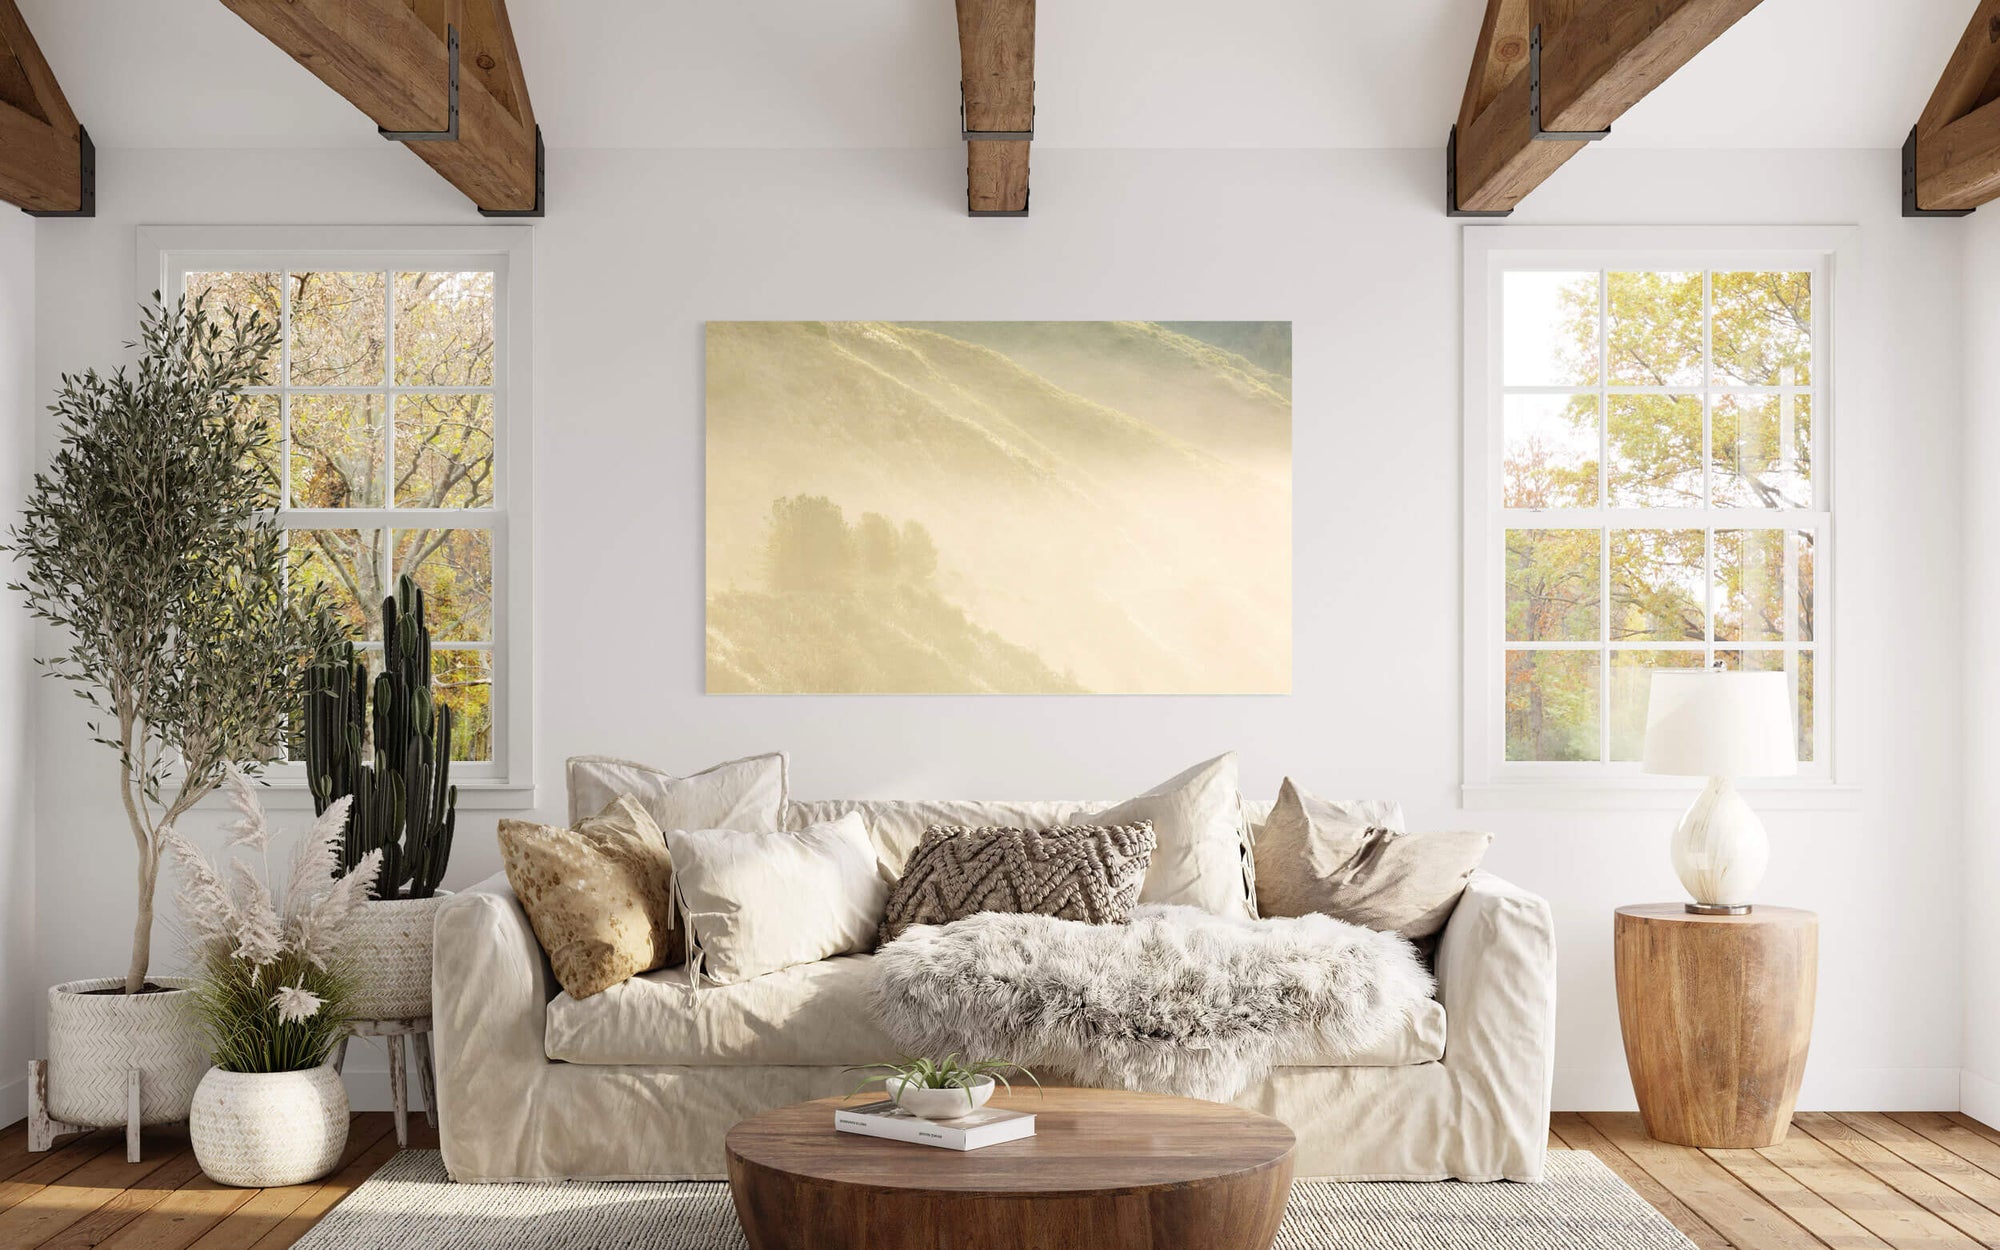 A Big Sur picture from the California coast hangs in a living room.